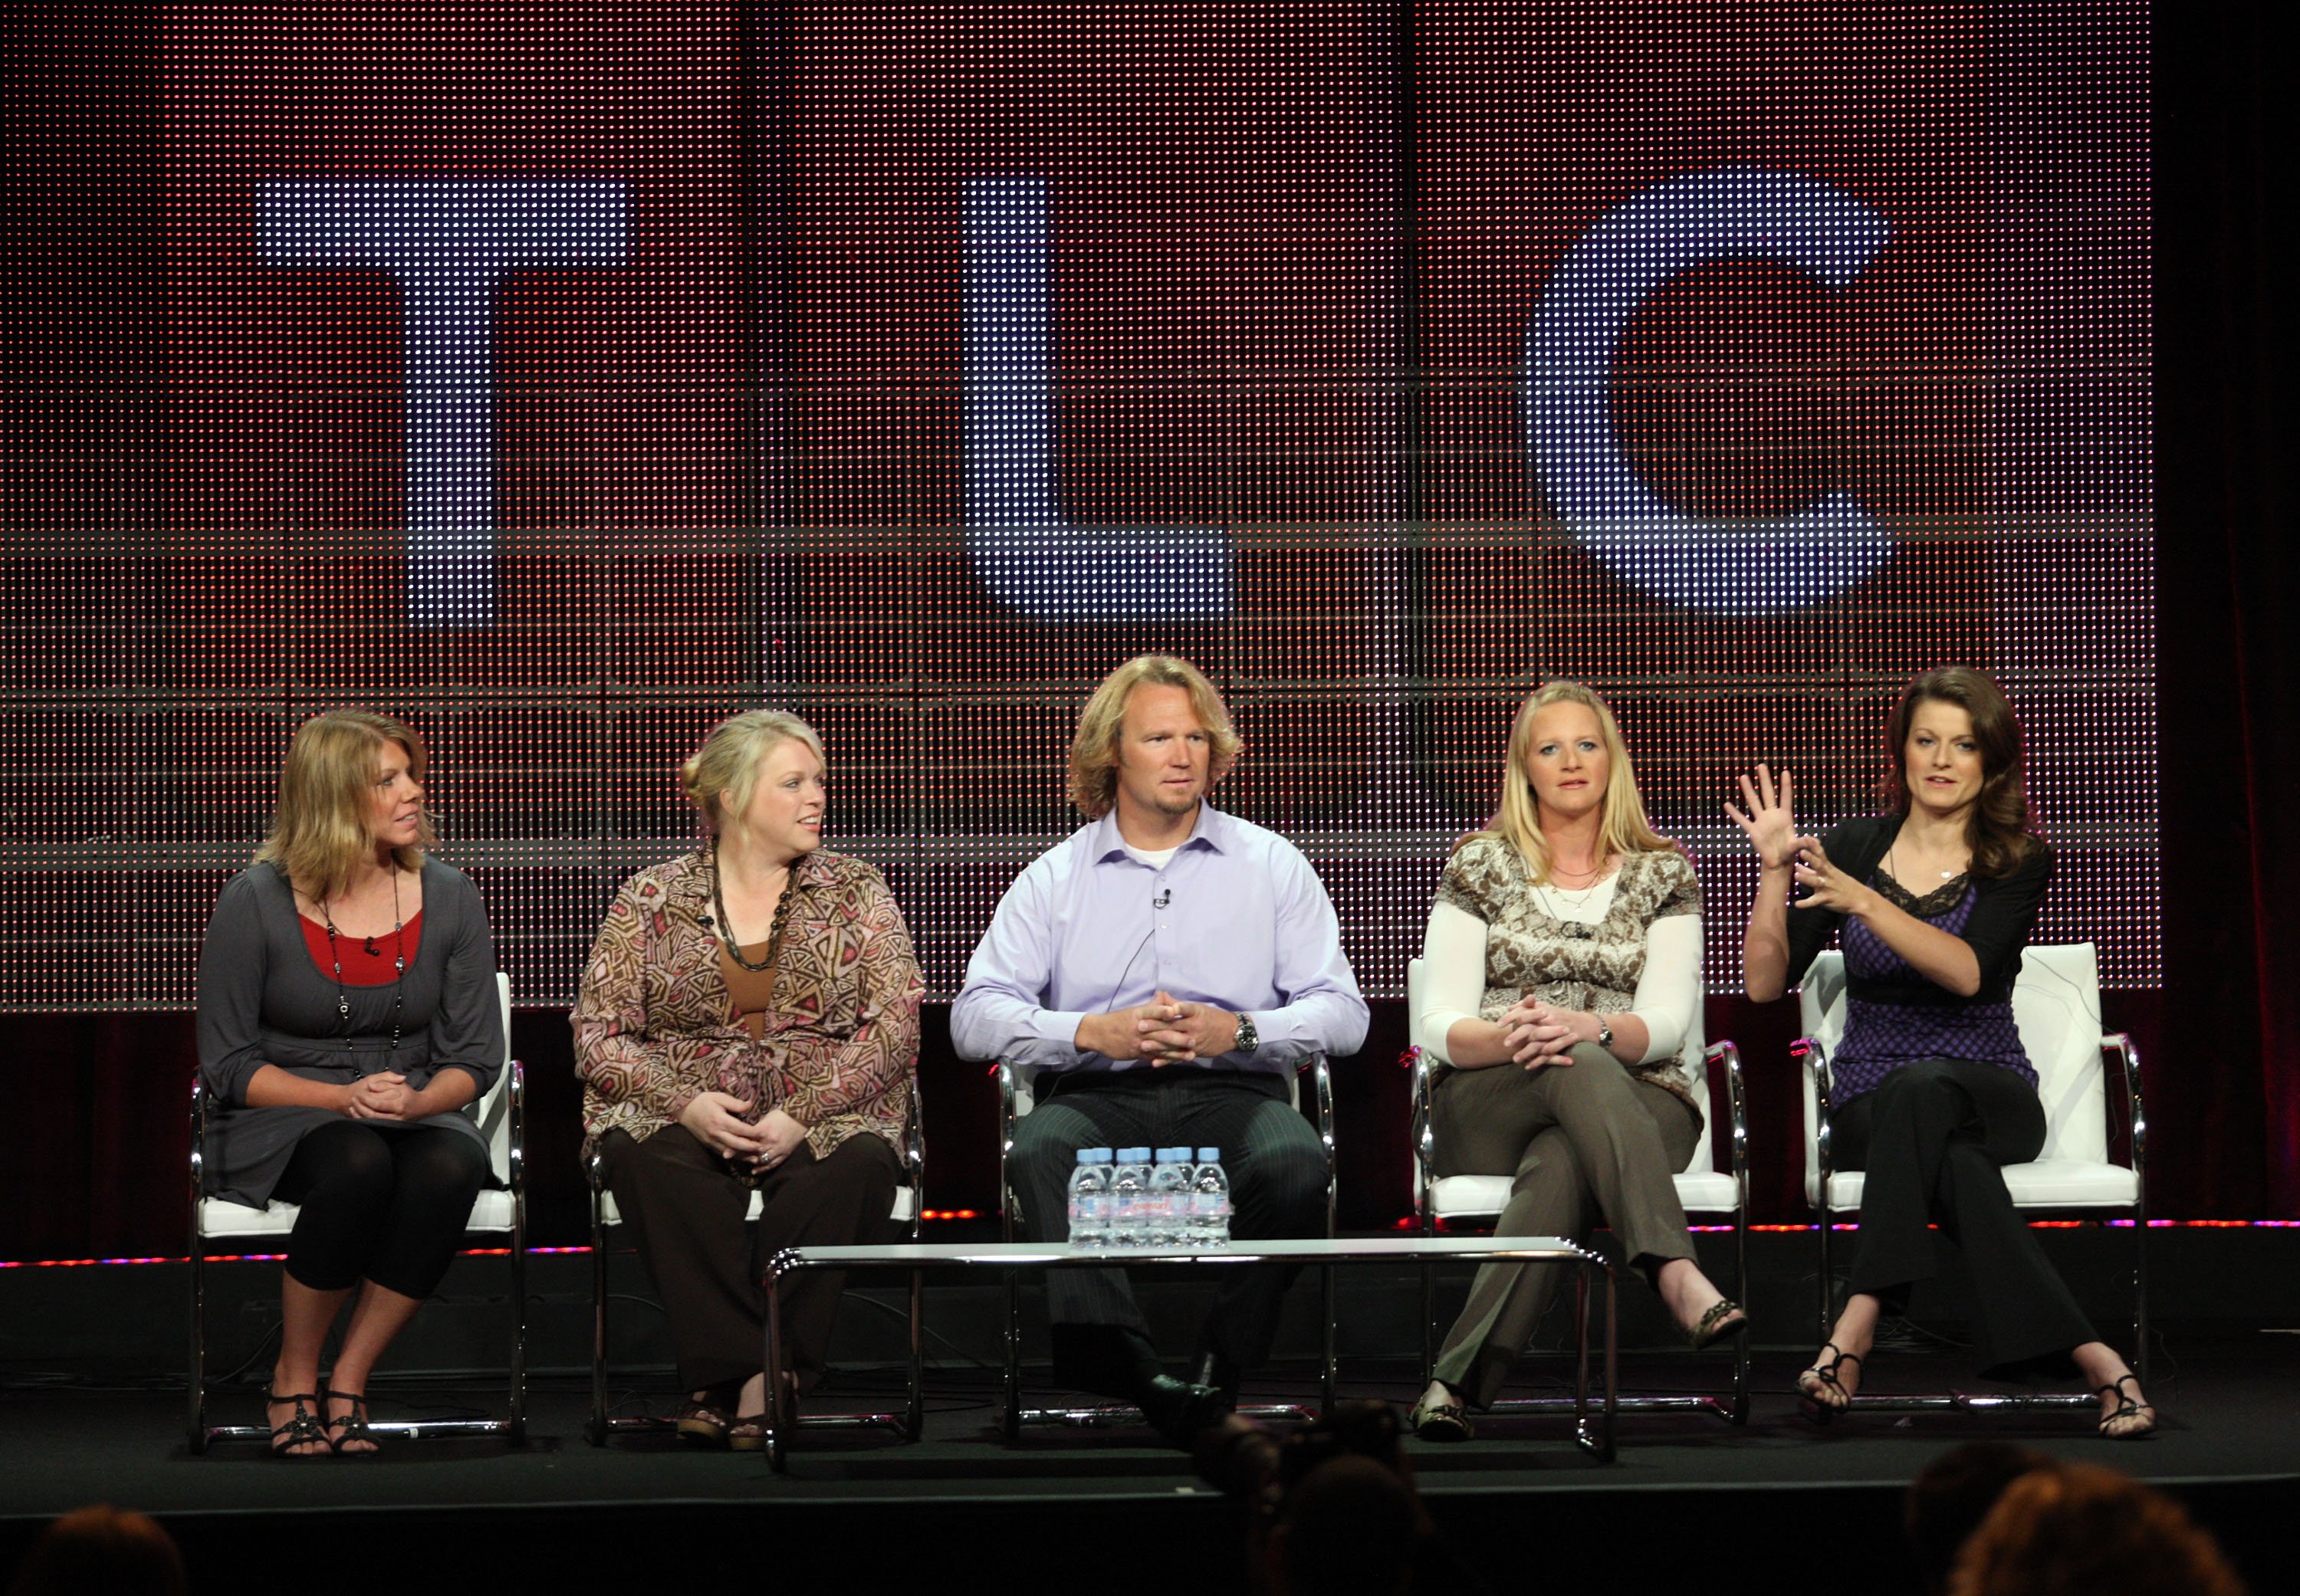 ,Meri Brown, Janelle Brown, Kody Brown, Christine Brown and Robyn Brown discuss 'Sister Wives' at the 2010 Summer TCA